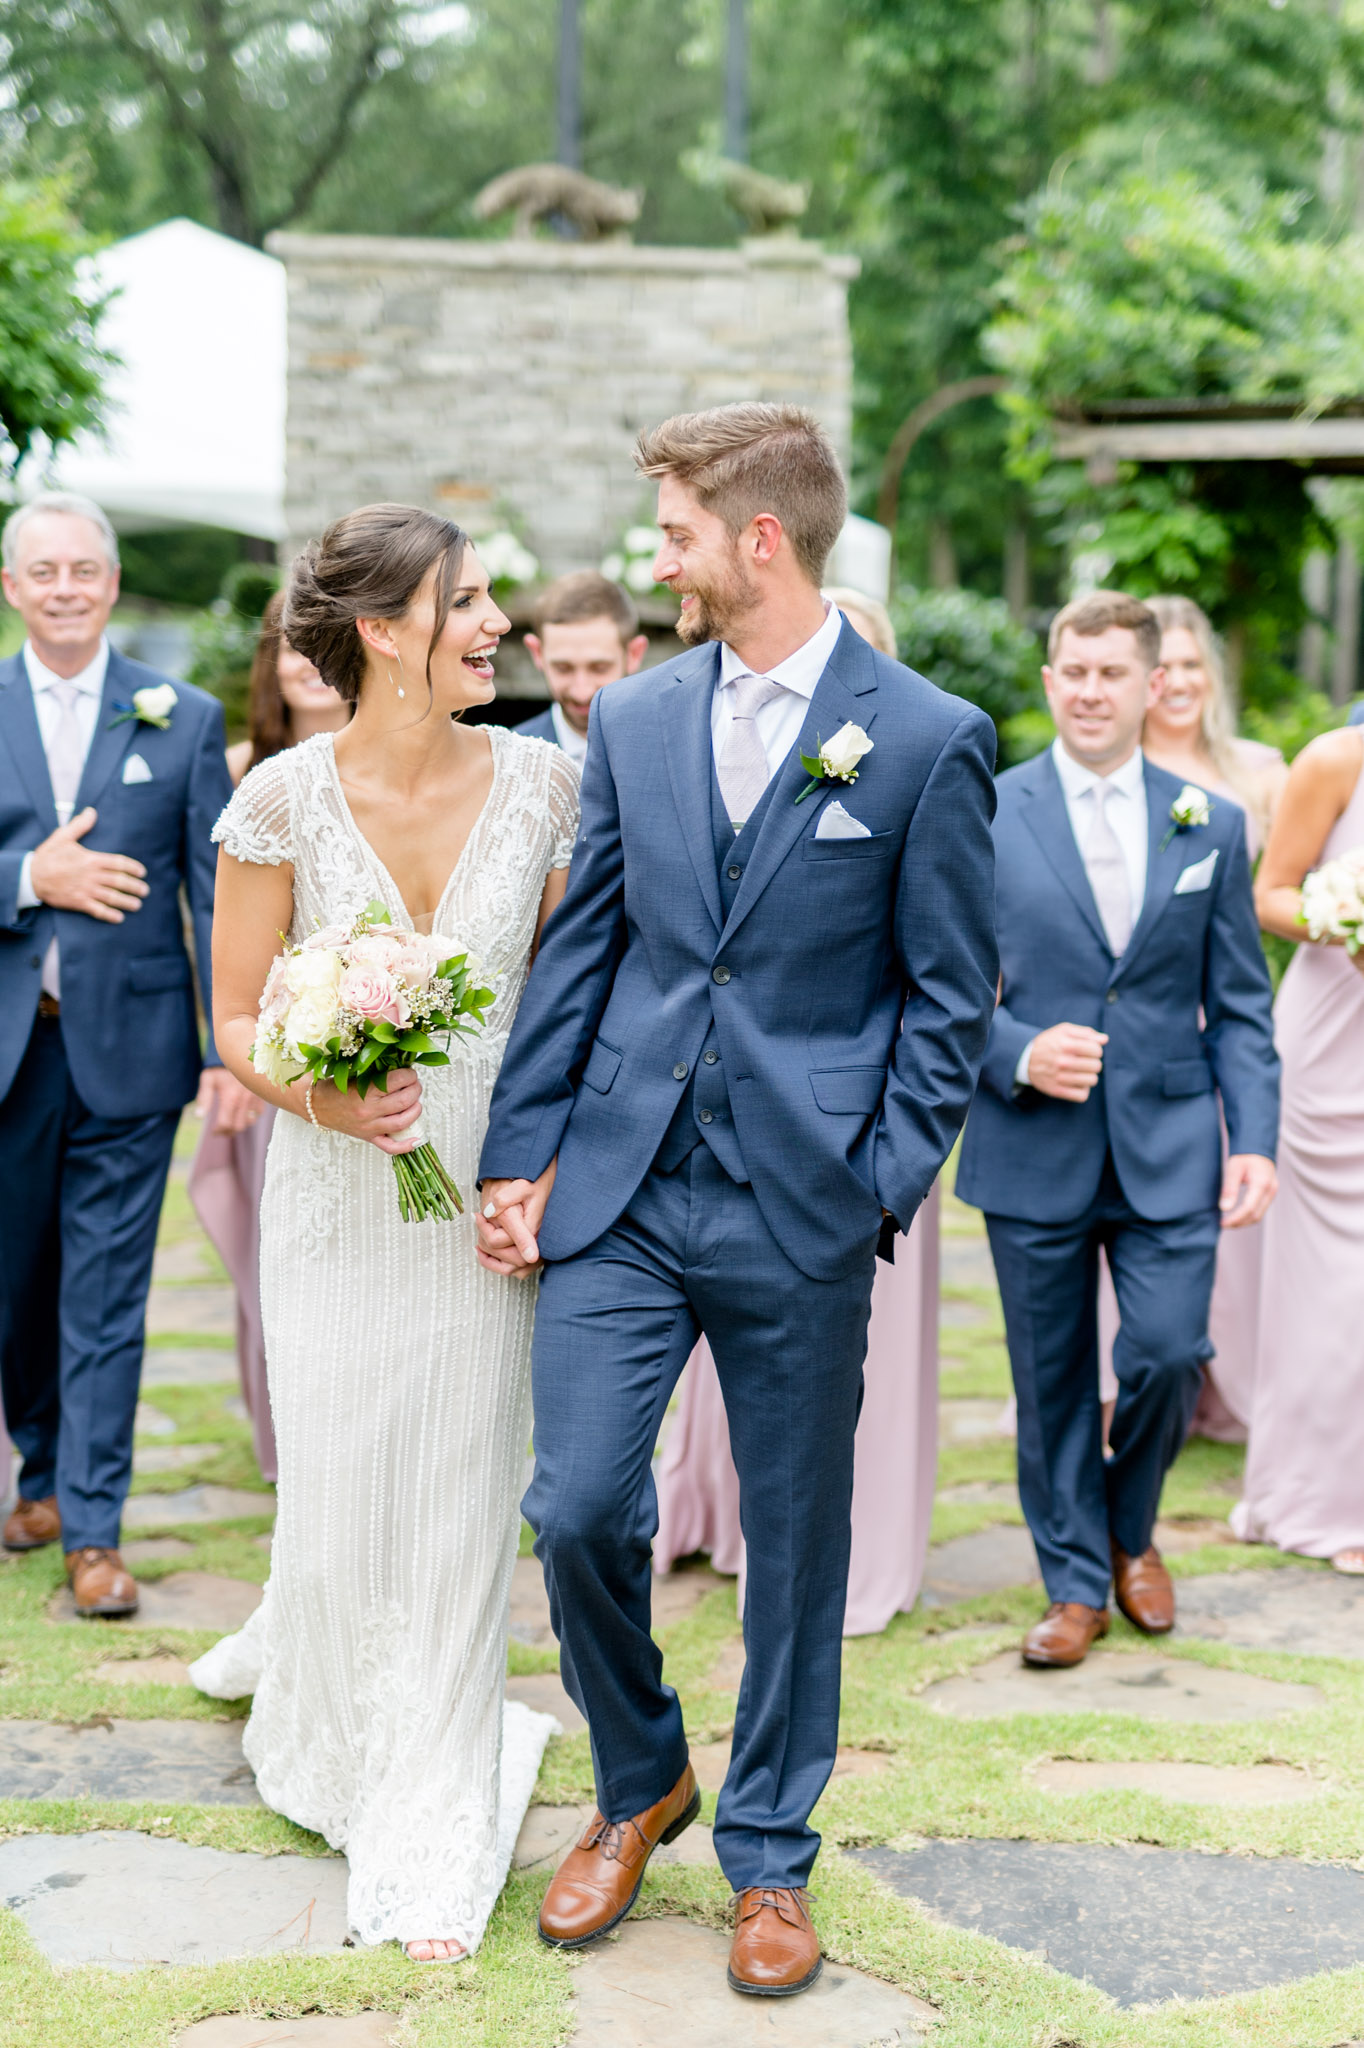 Bride and groom laugh together while walking with wedding party